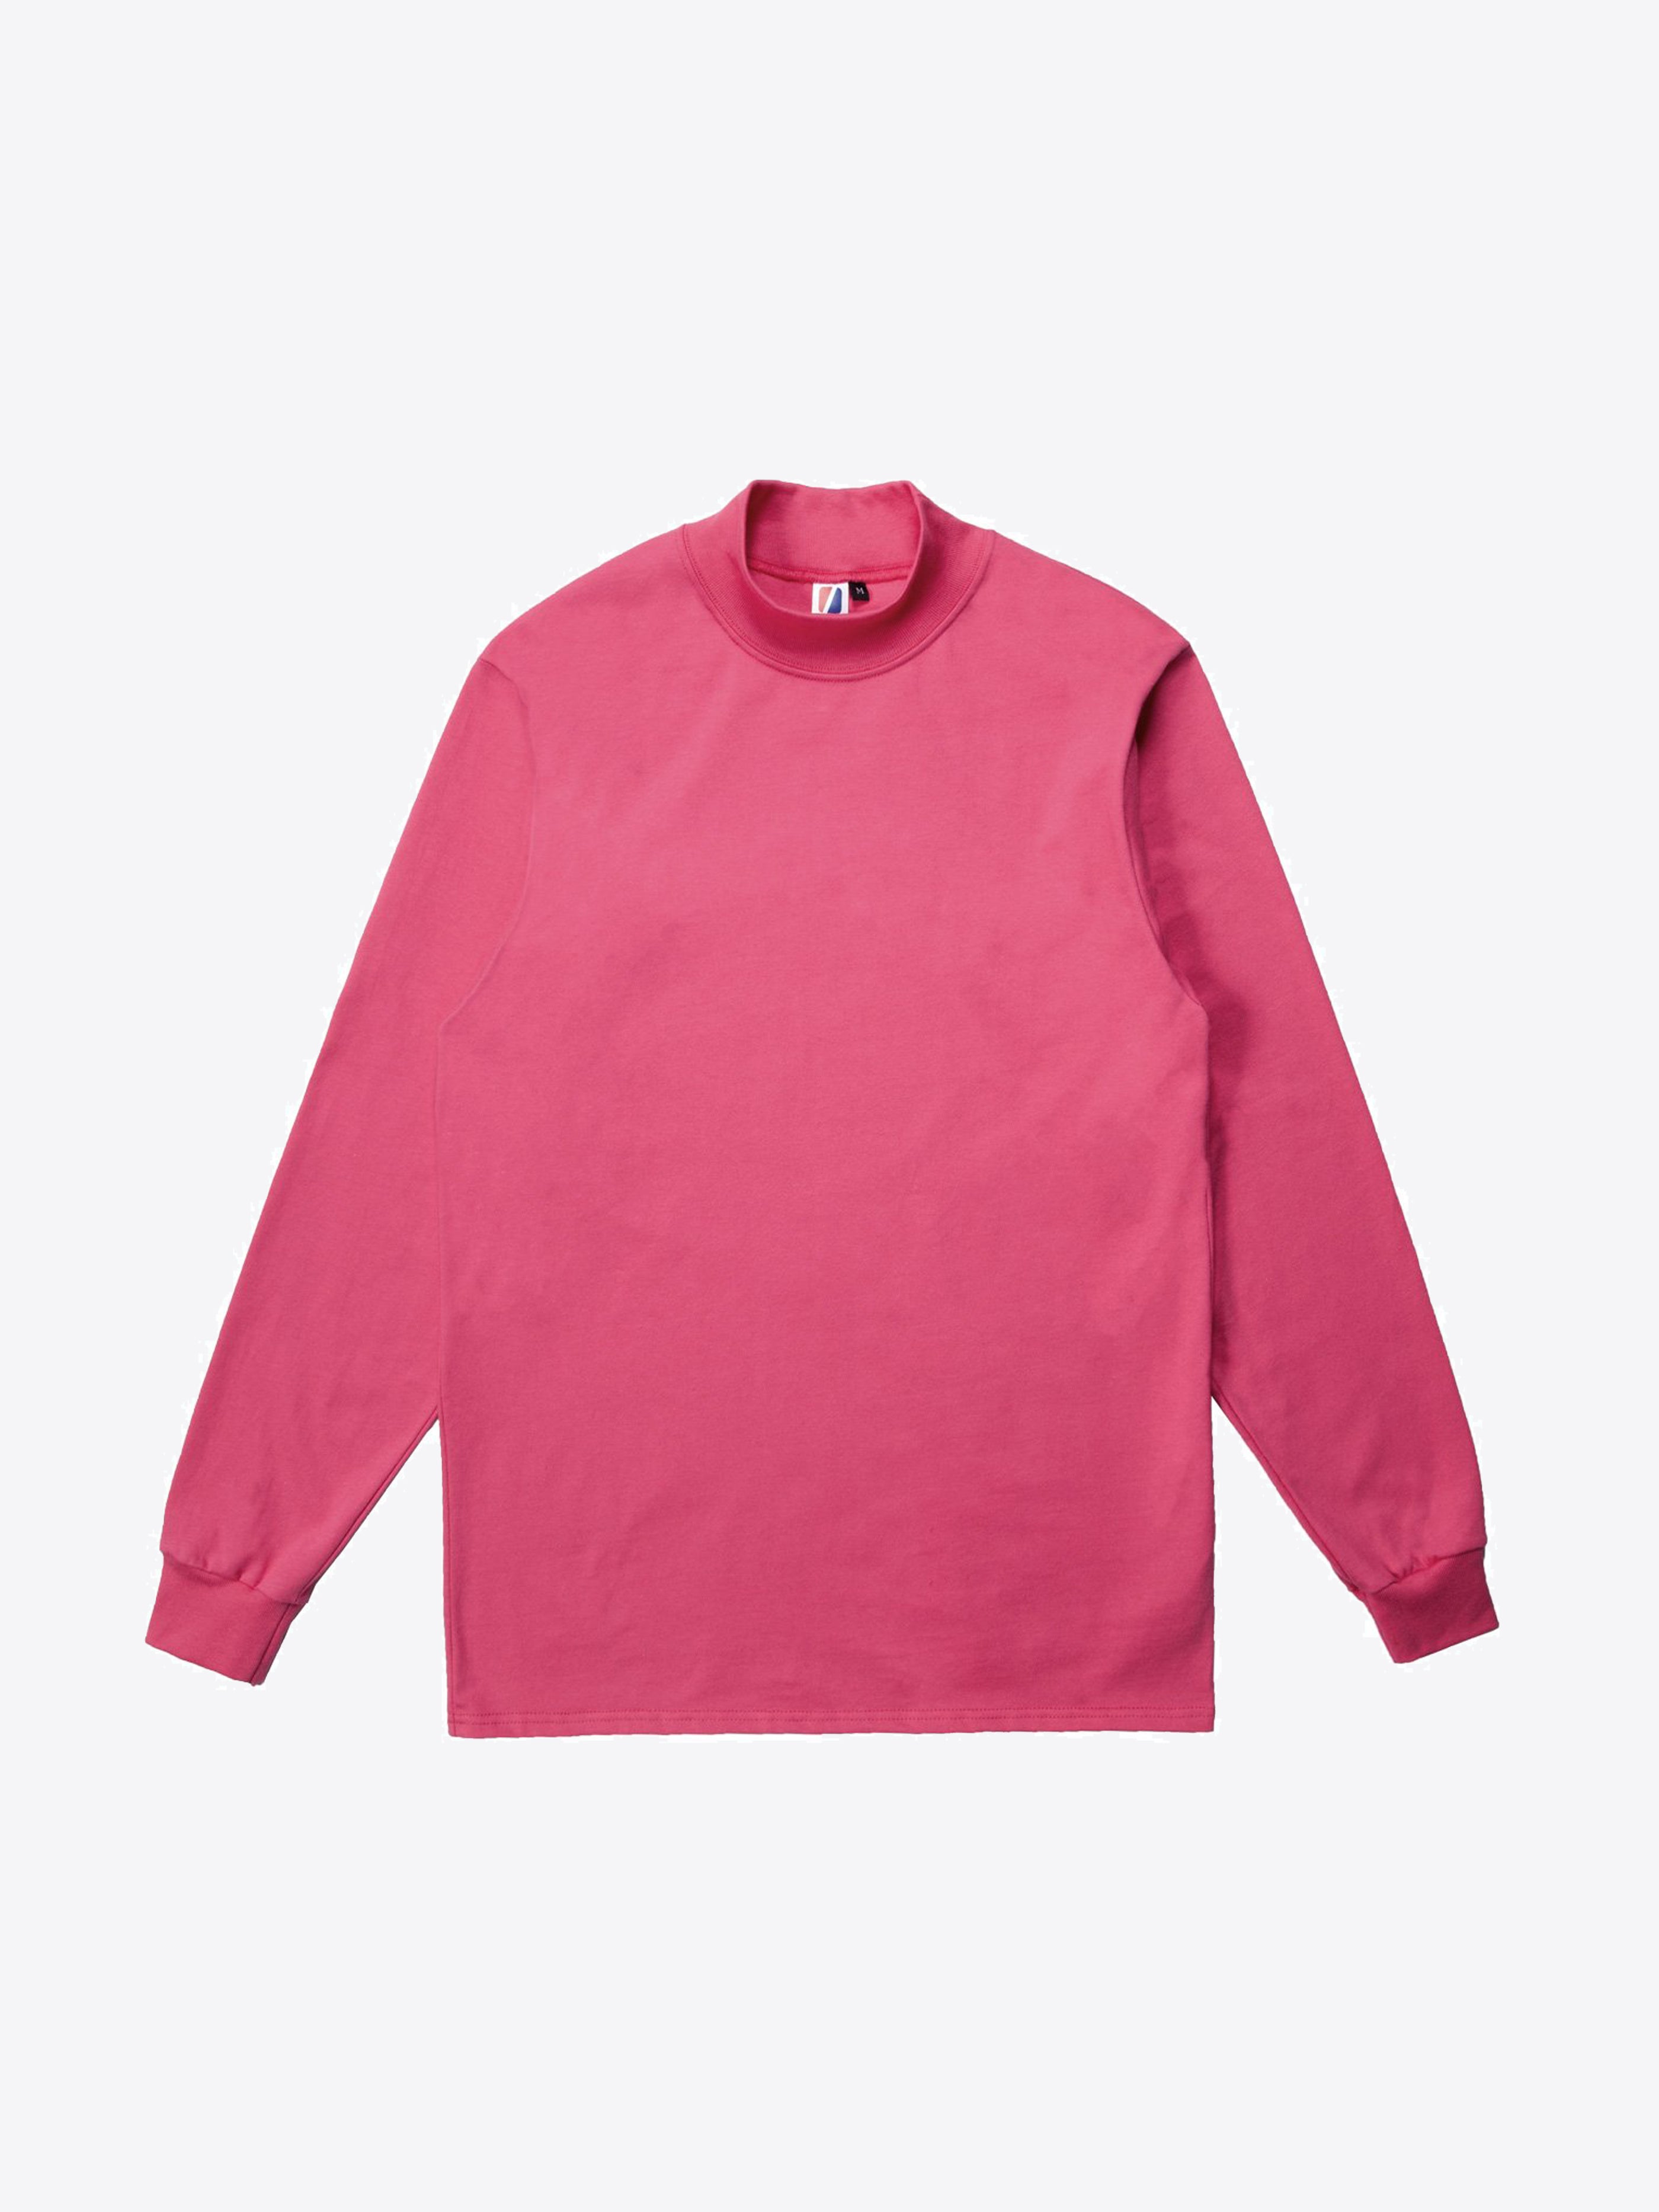 Download Hot Pink Mock Neck | Made in USA - Stateline US